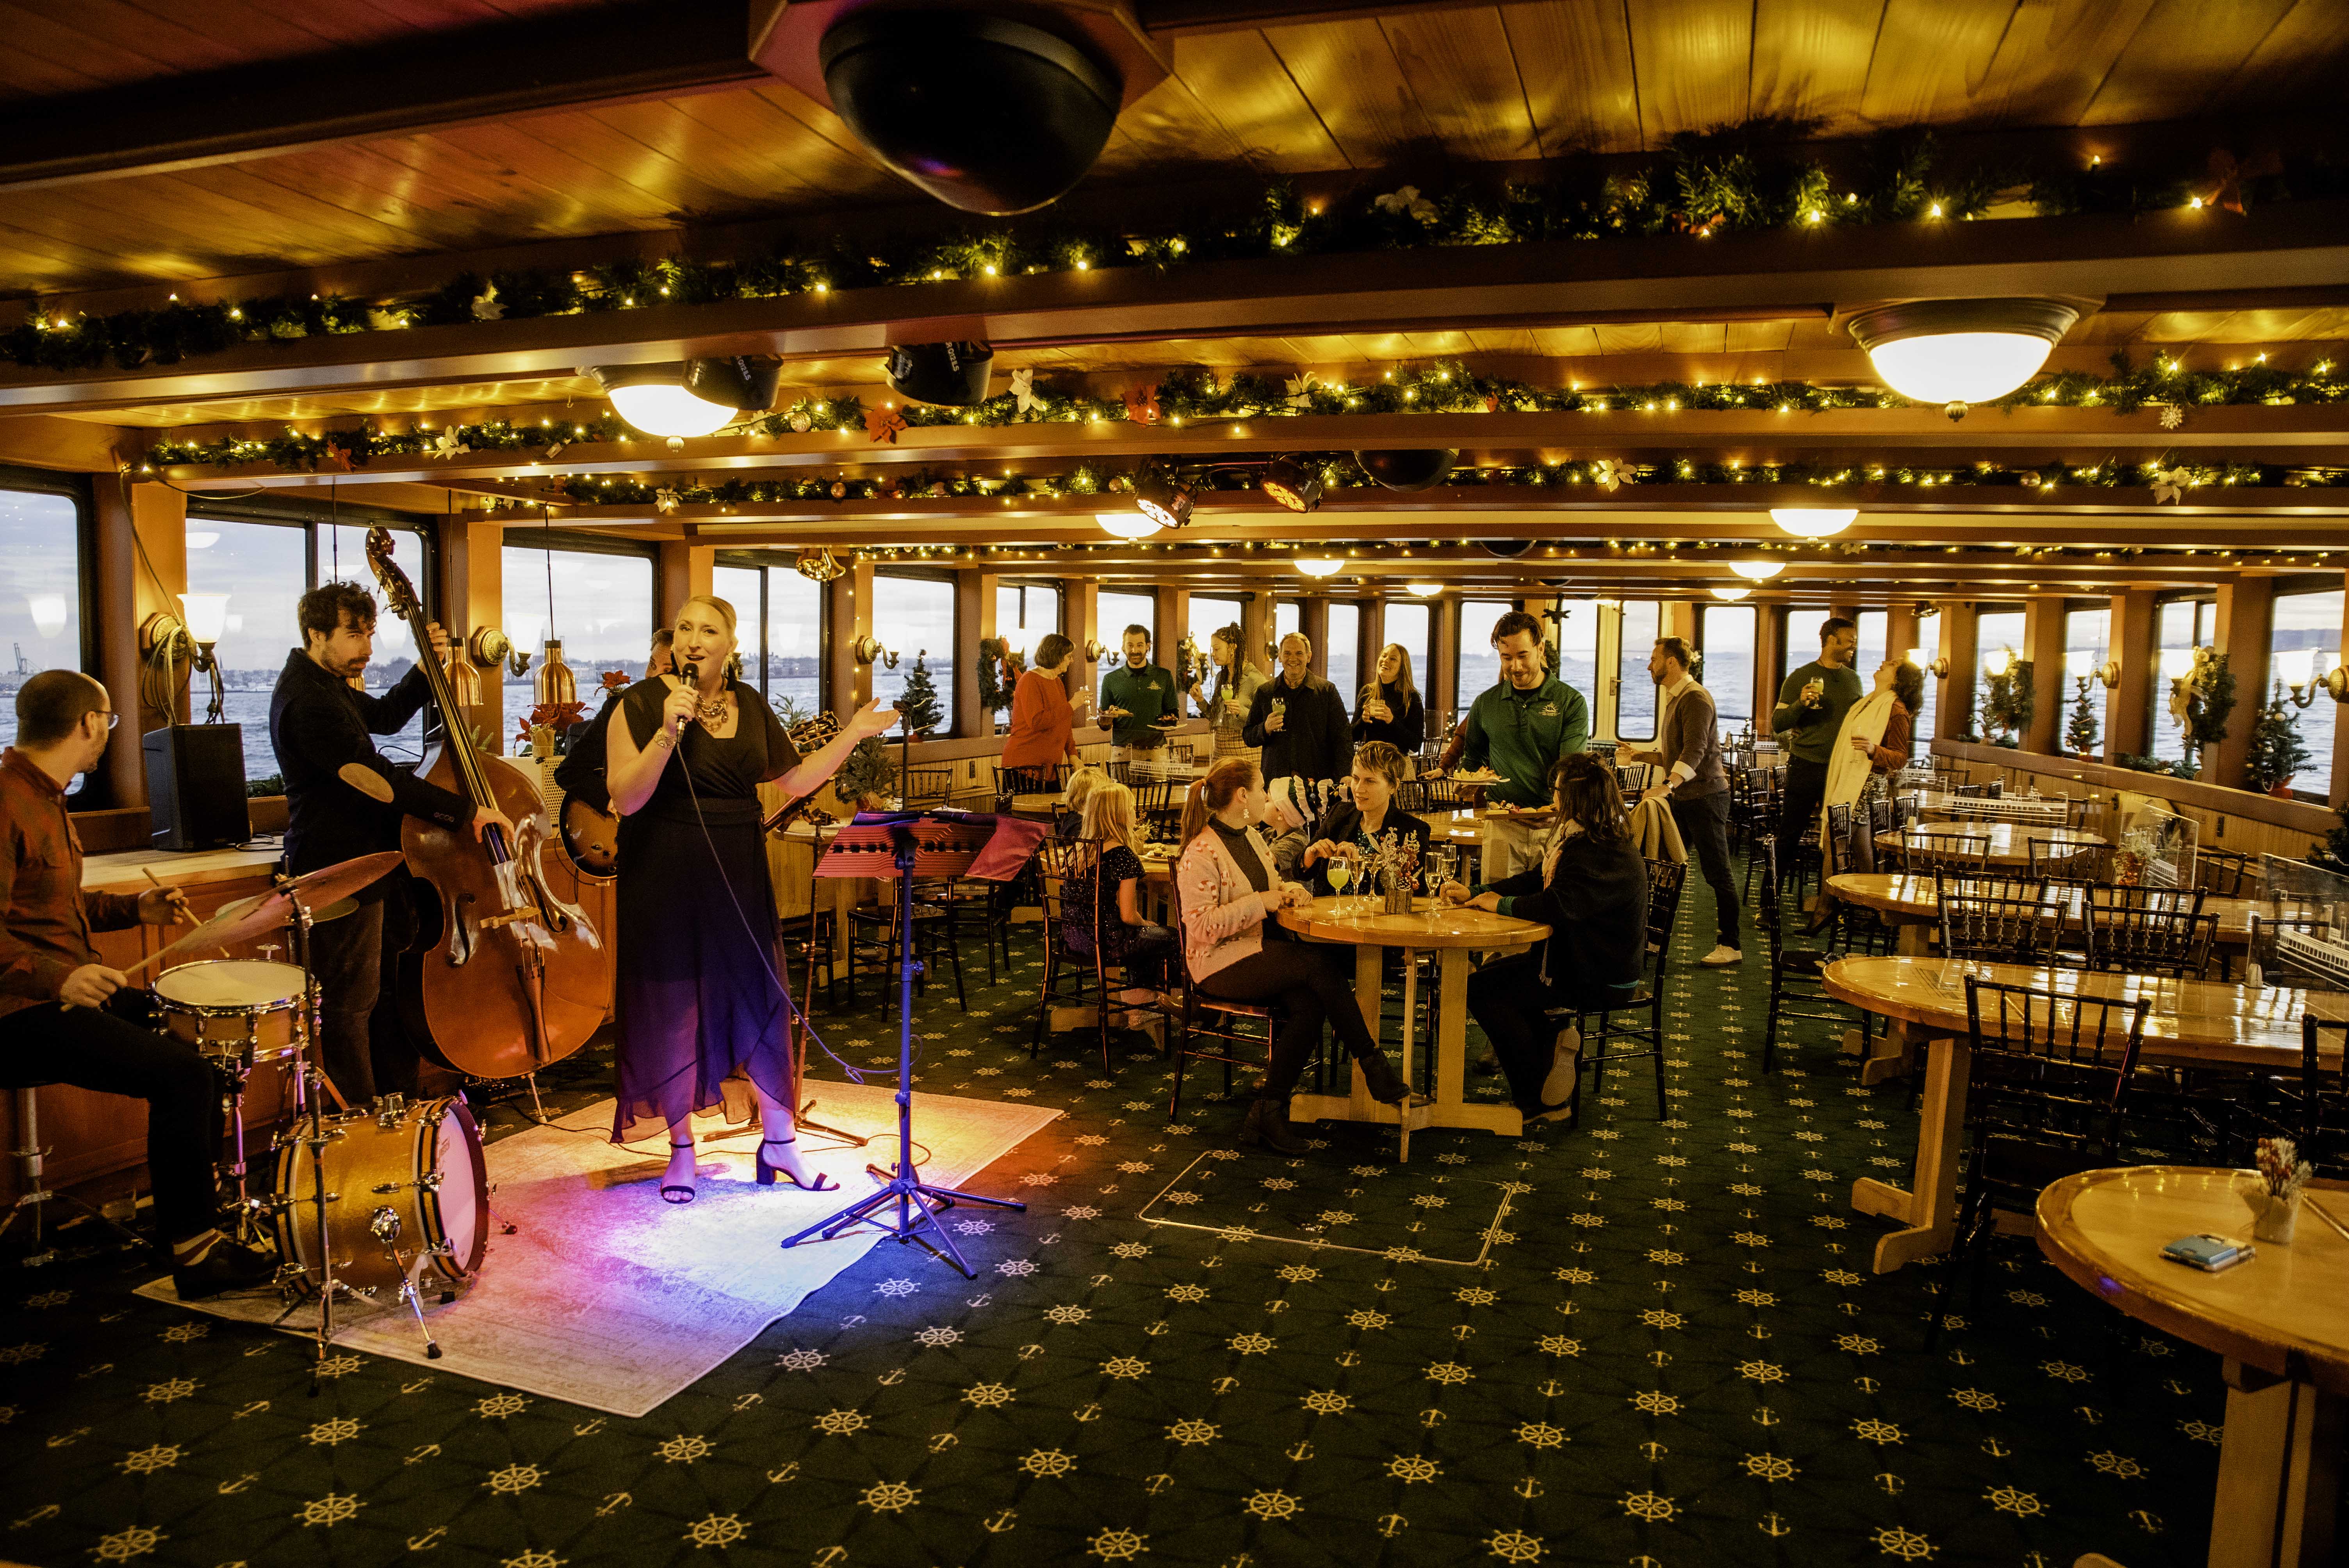 The interior salon of the Yacht Northern Lights decked out in Holiday decor as a band plays and guests enjoy food and drink